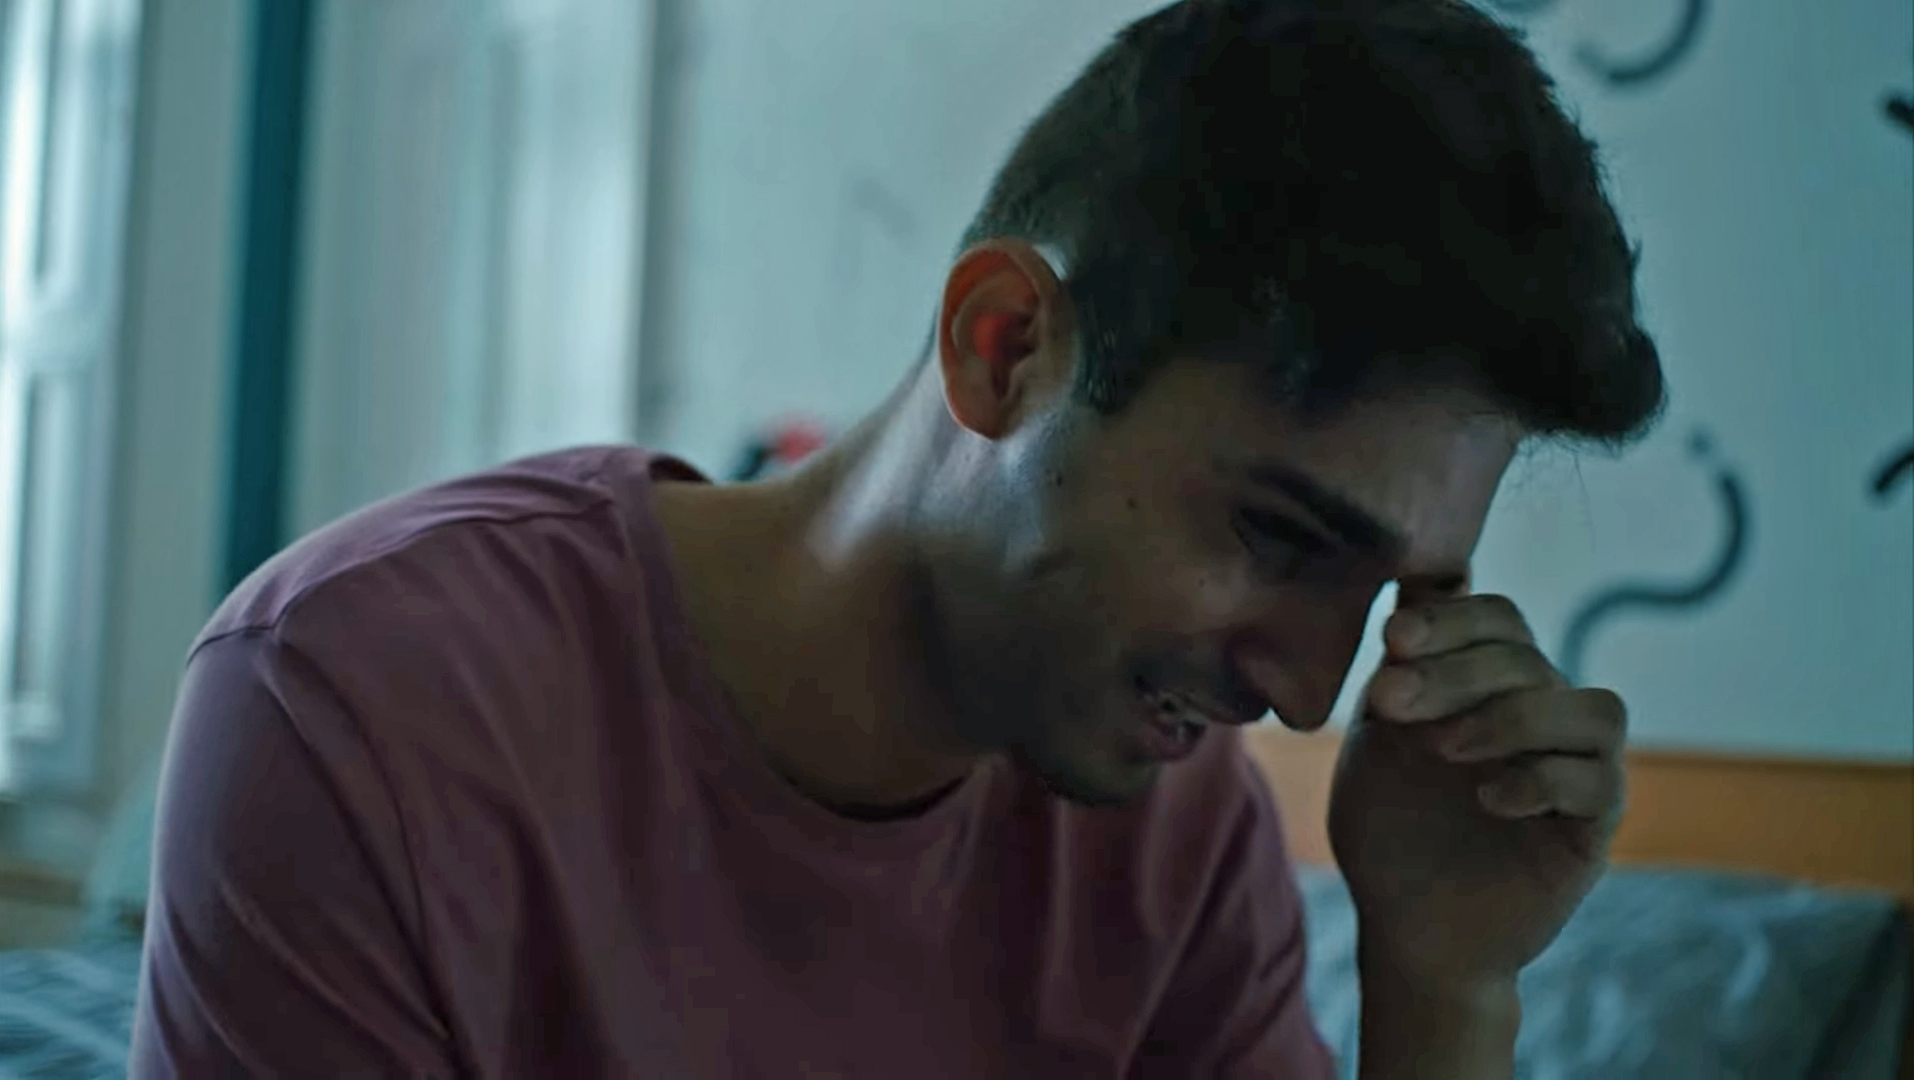 Man crying, with the text "stigma is more harmful than HIV"